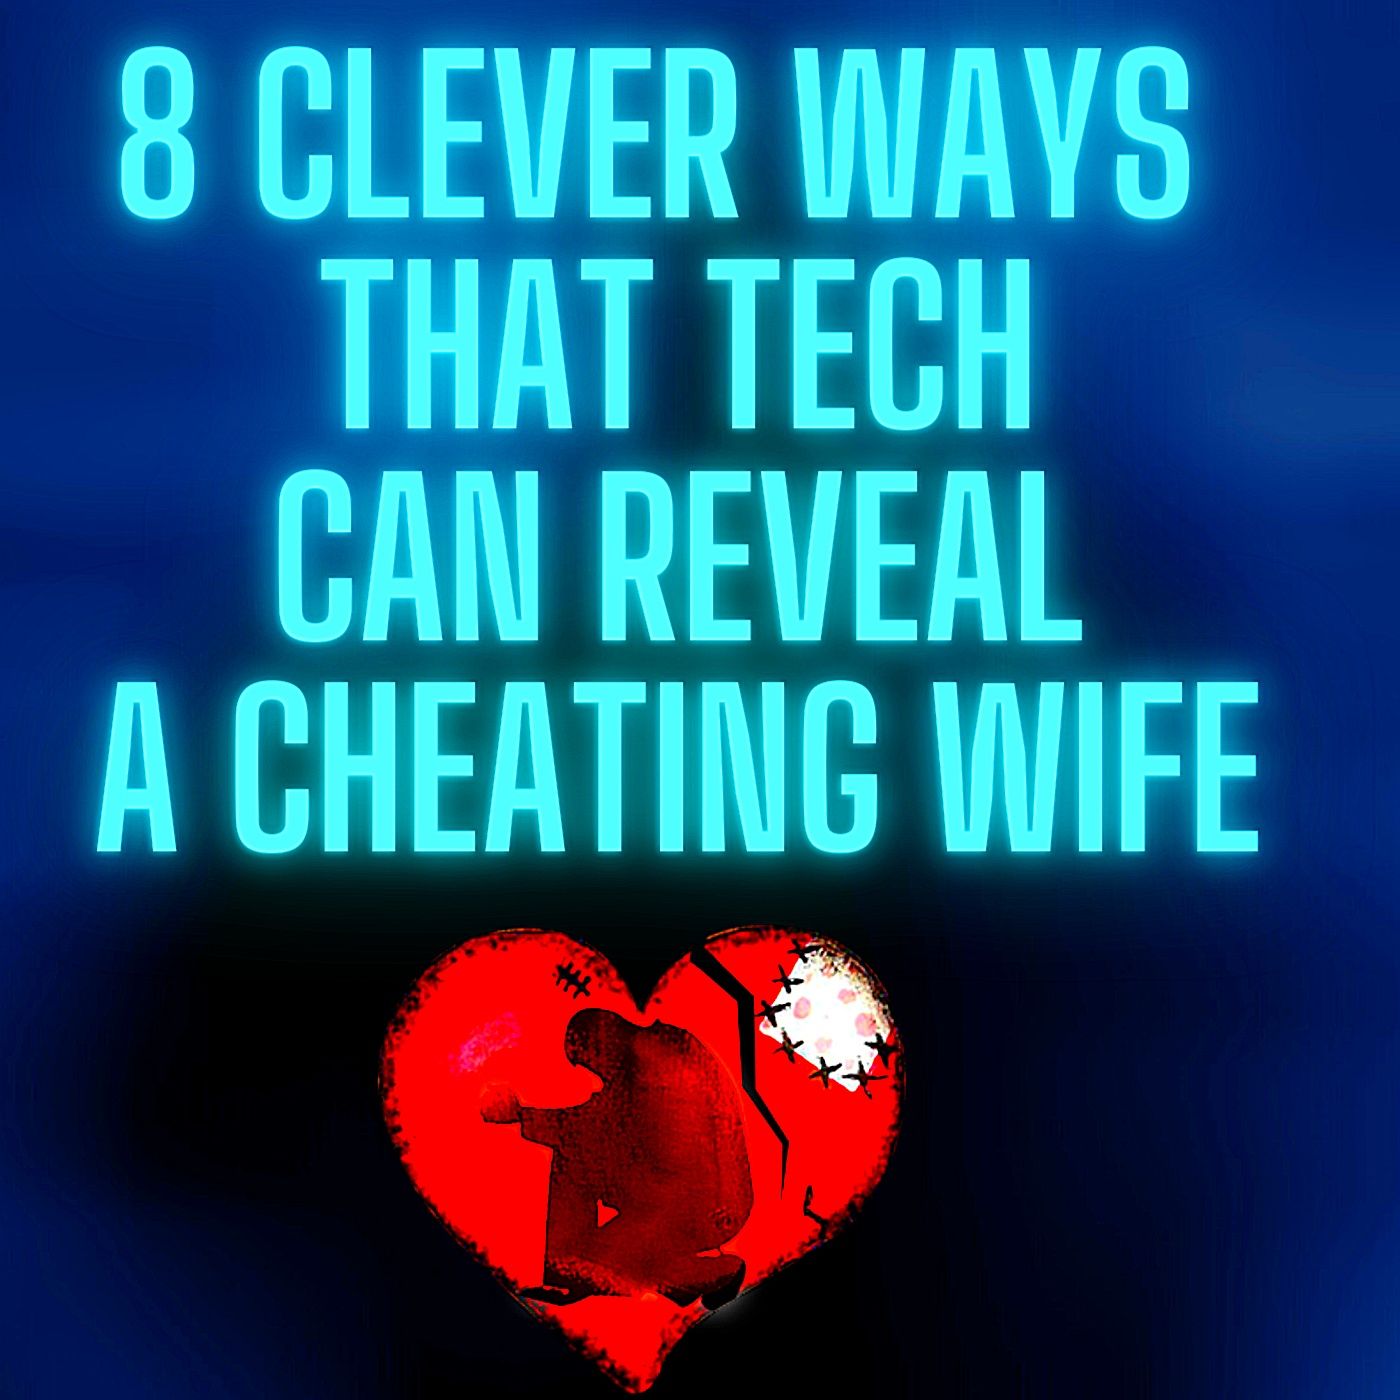 8 clever ways that tech can reveal a cheating wife or girlfriend